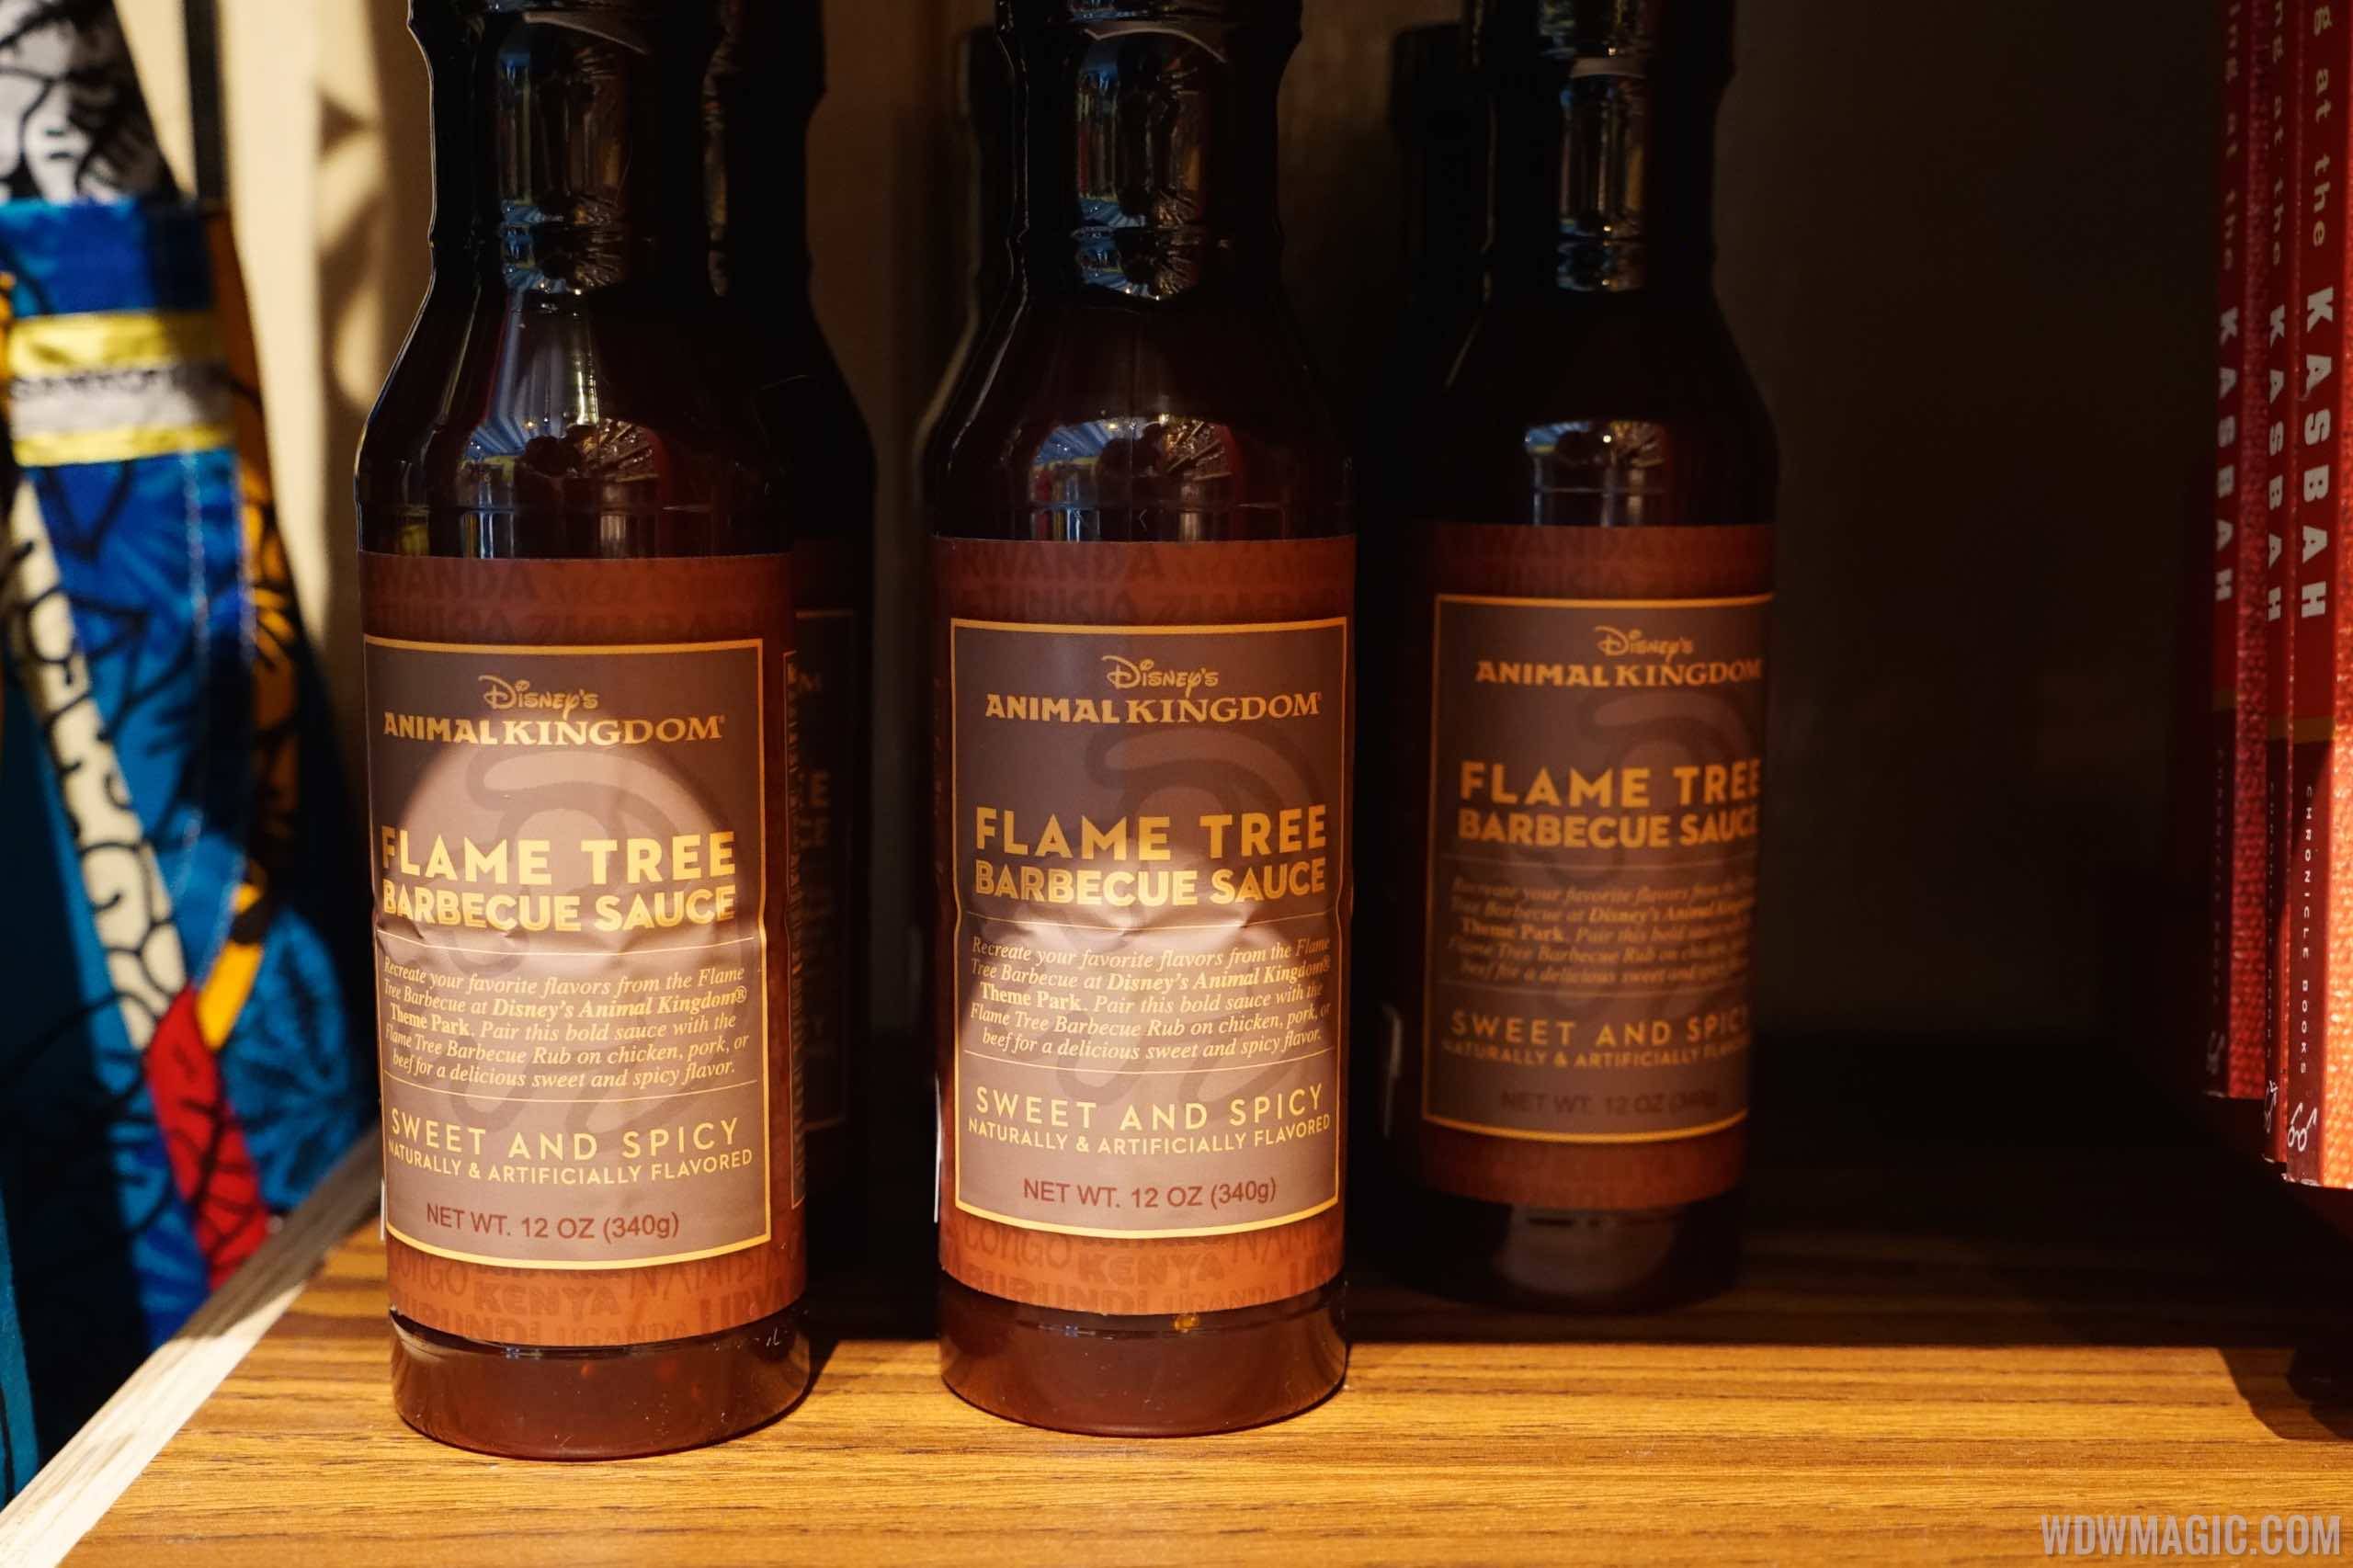 Zuri's Sweets Shop - Flame tree Barbecue Sauce bottle